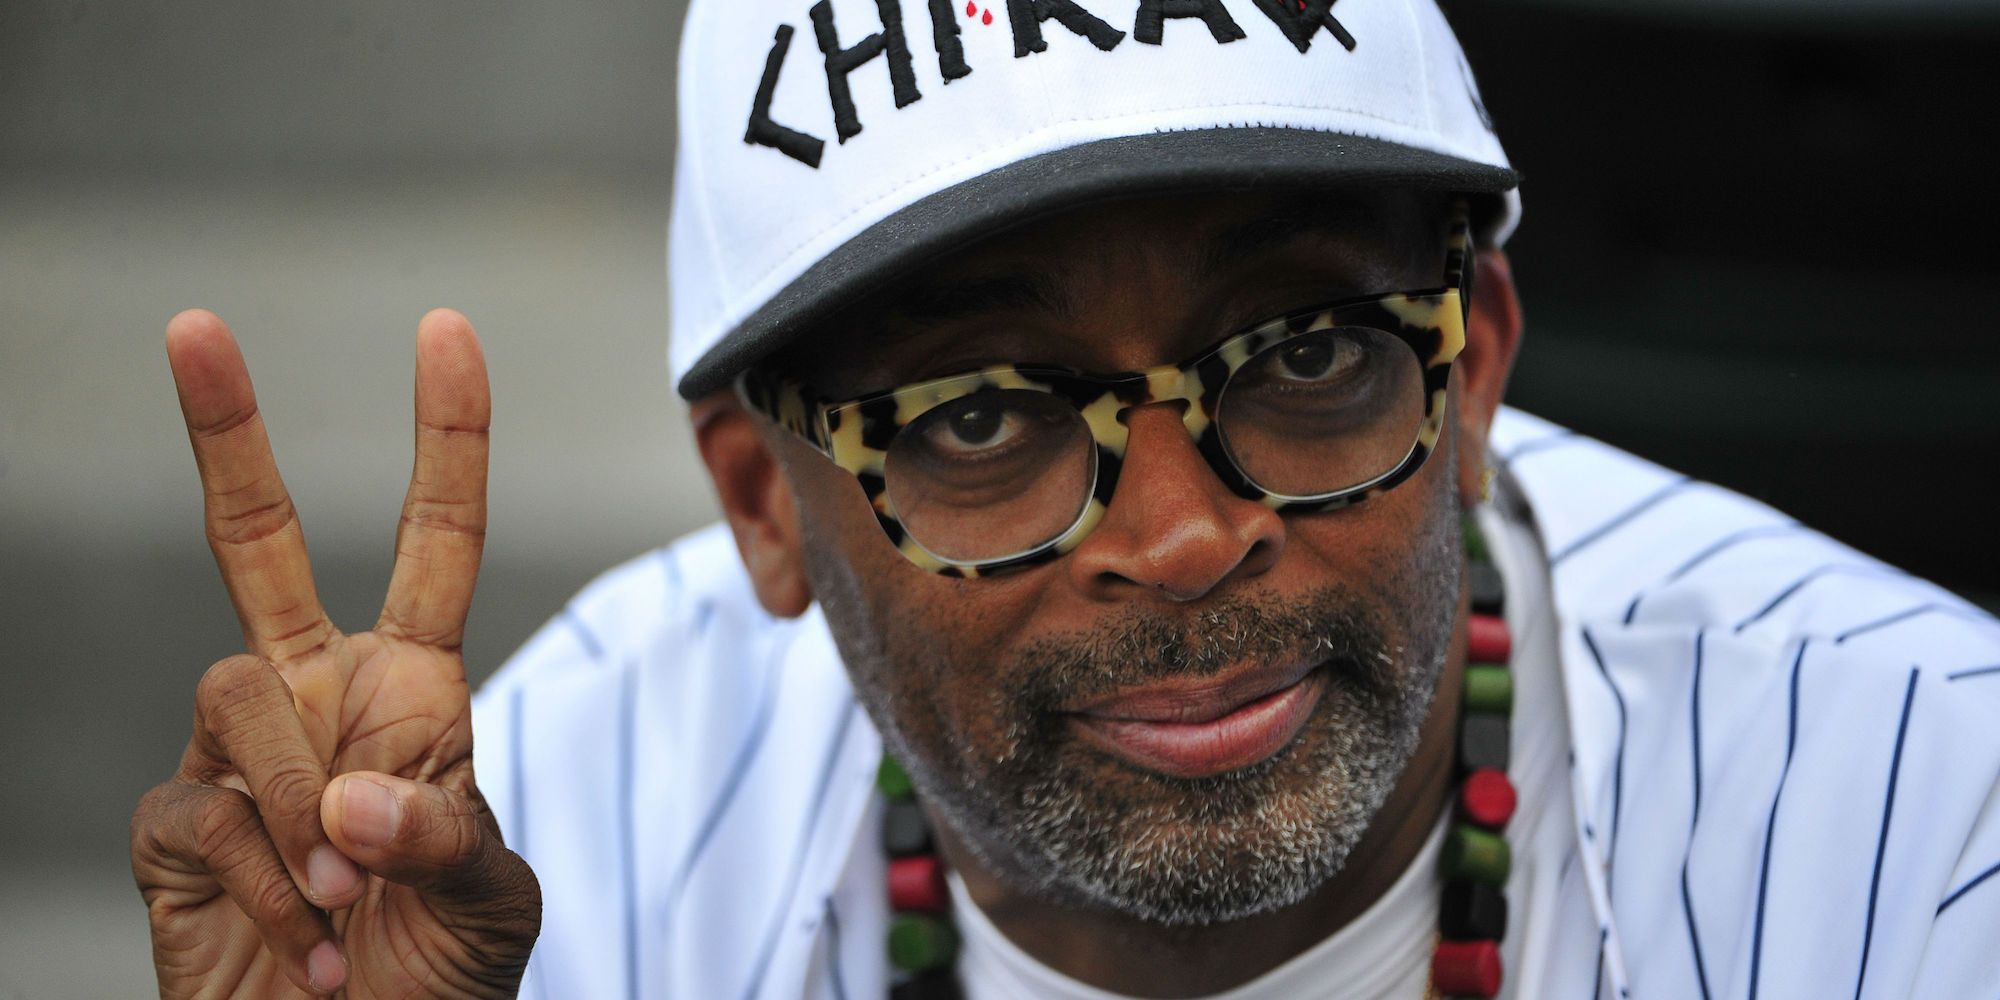 Spike Lee posing for camera flashing peace sign